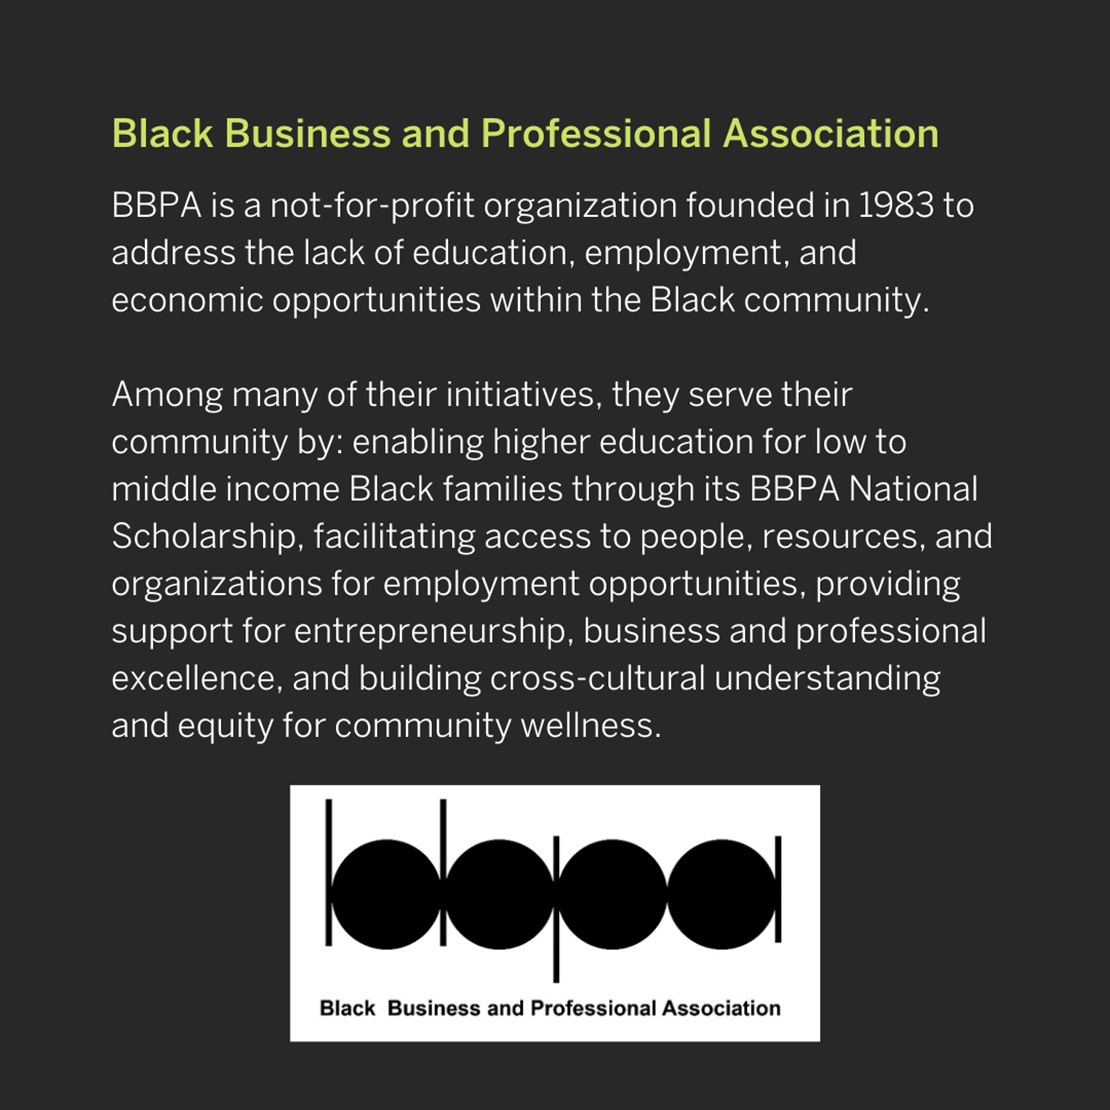 Black Business and Professional Association